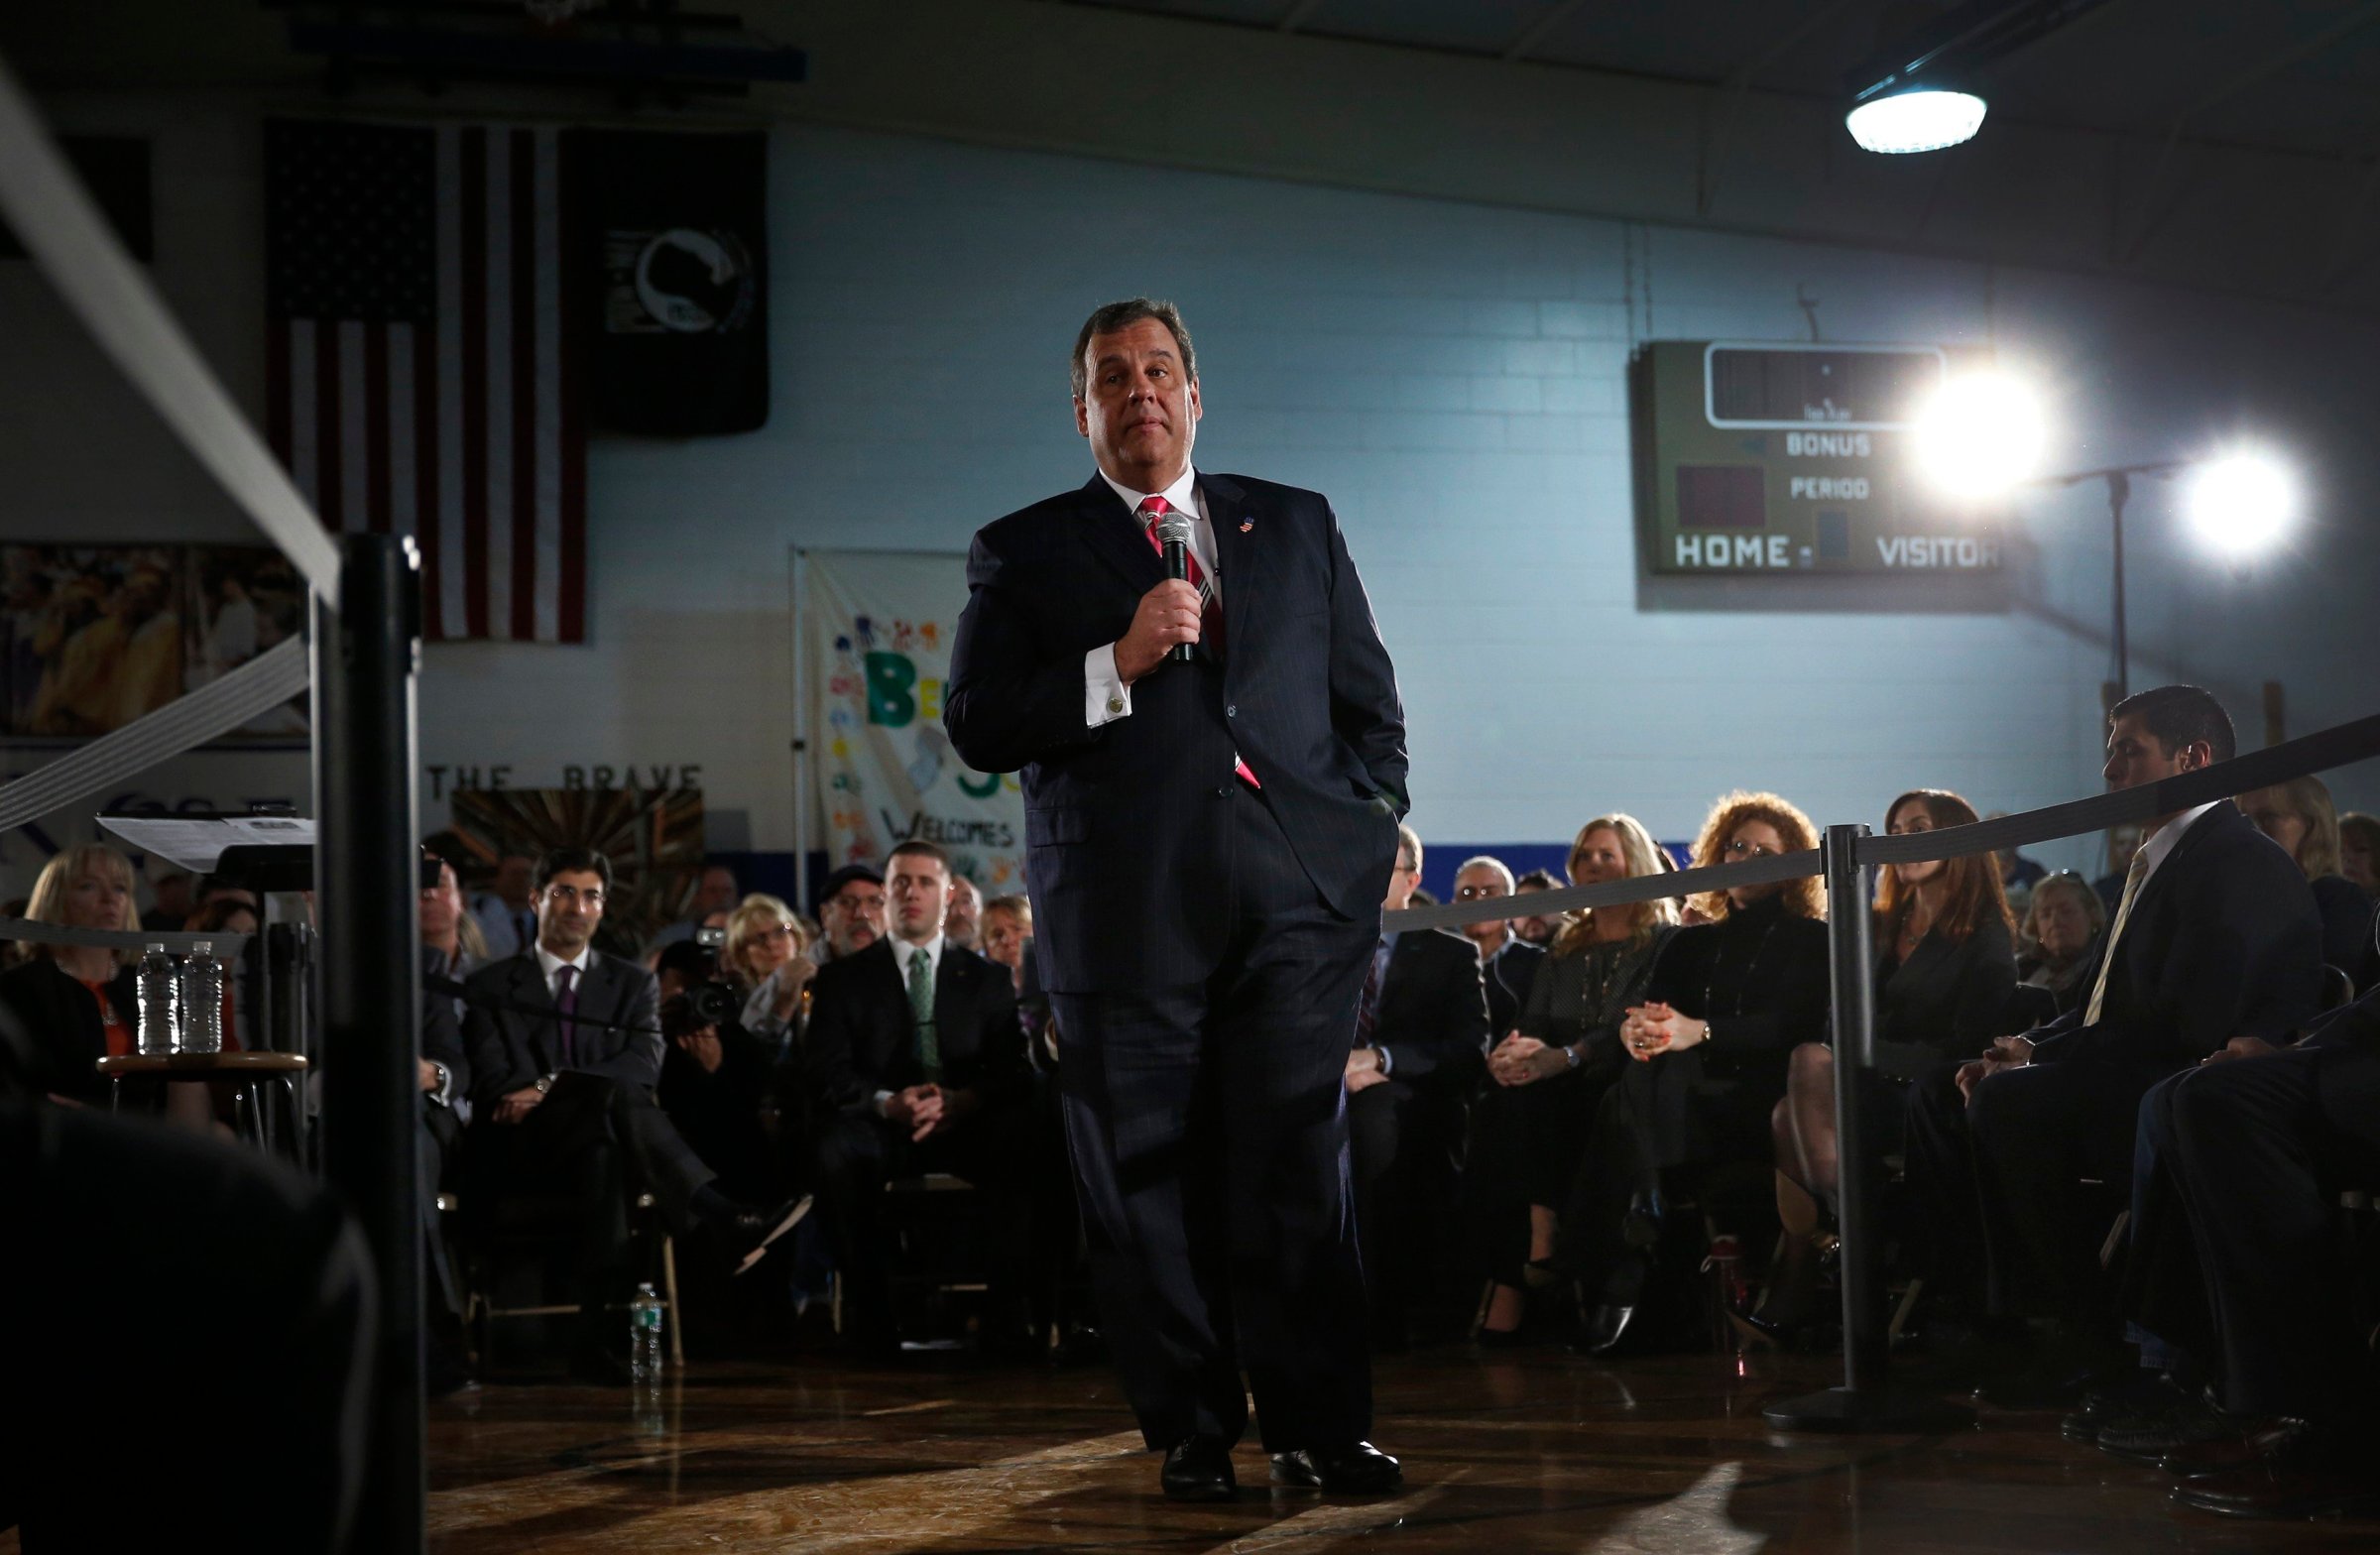 New Jersey Governor Chris Christie speaks to local residents of Belmar, New Jersey.